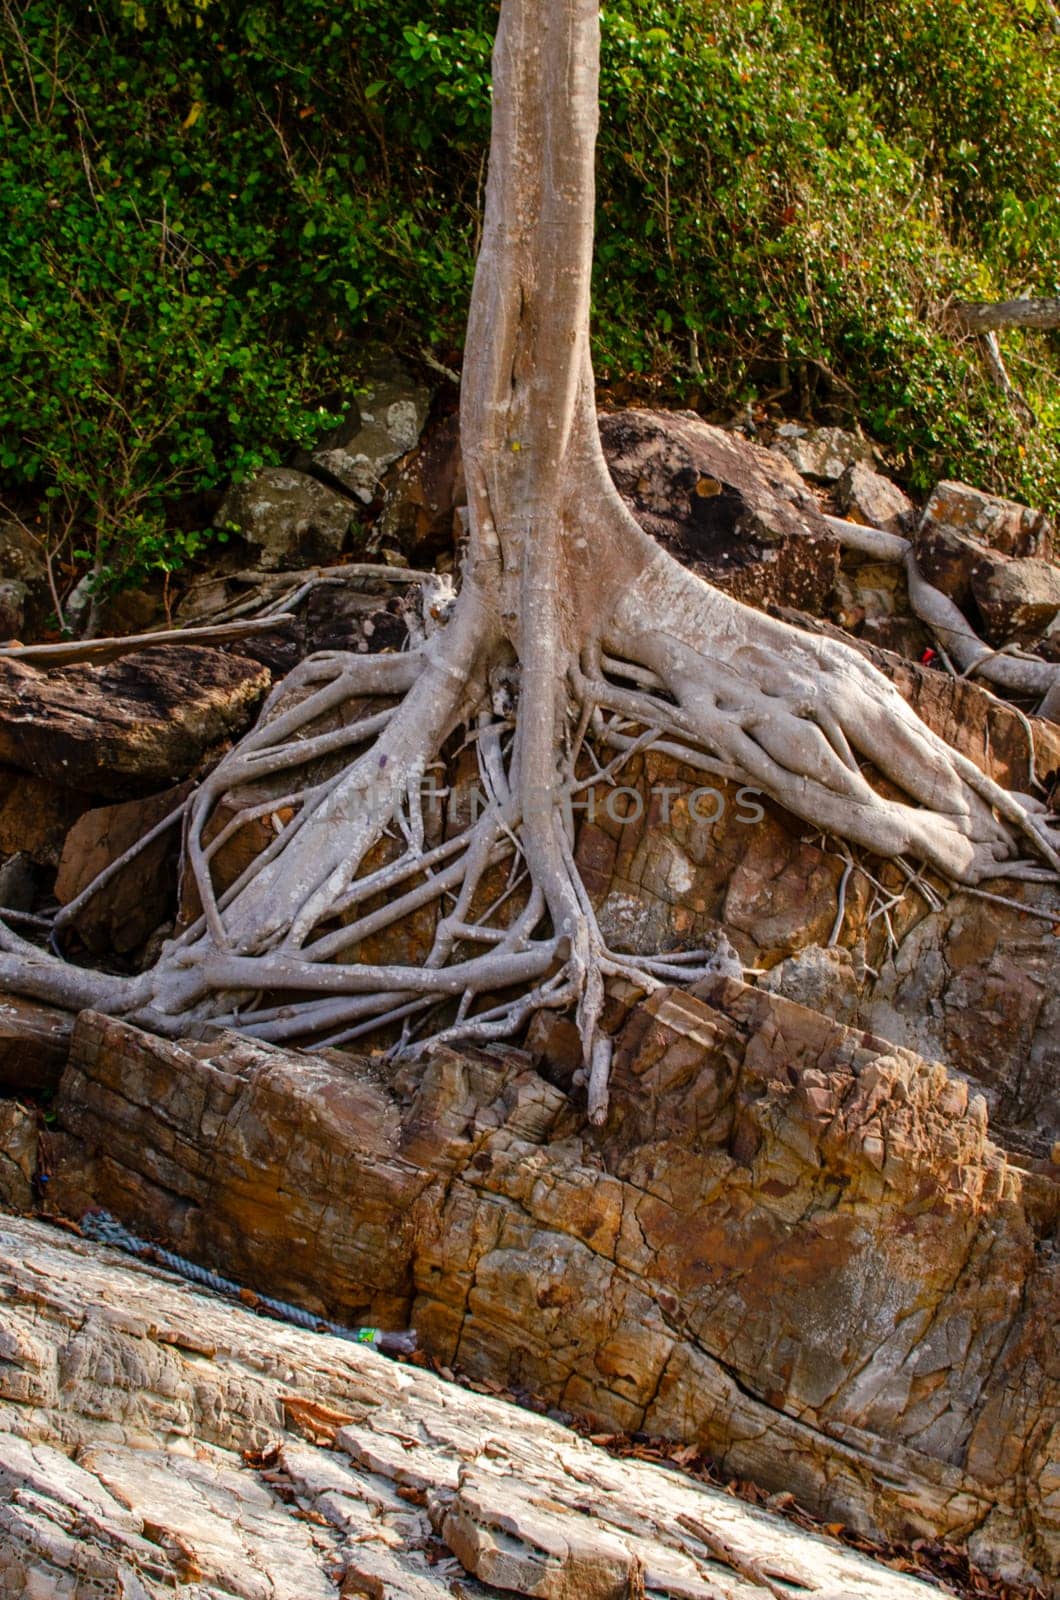 Tree roots on the beach abstract photo by lucia_fox